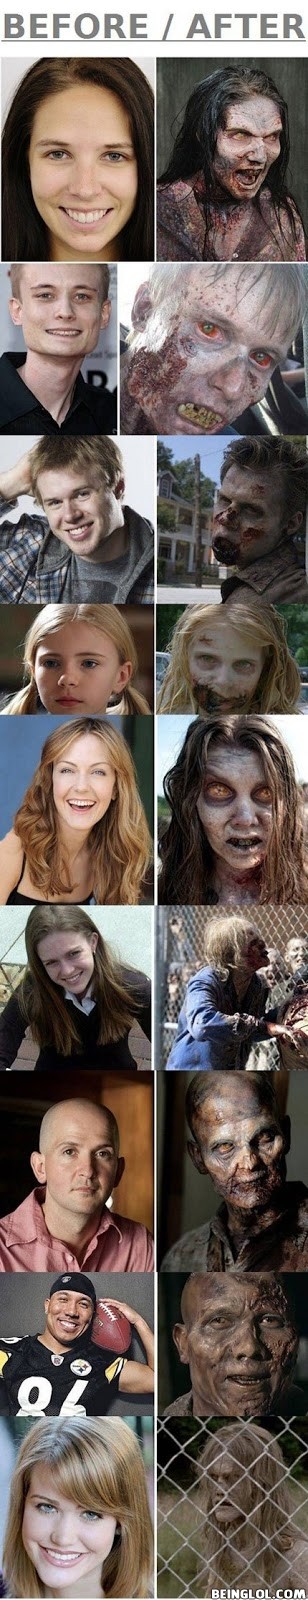 Top 10 Make-Up of the Walking Dead’s Zombies